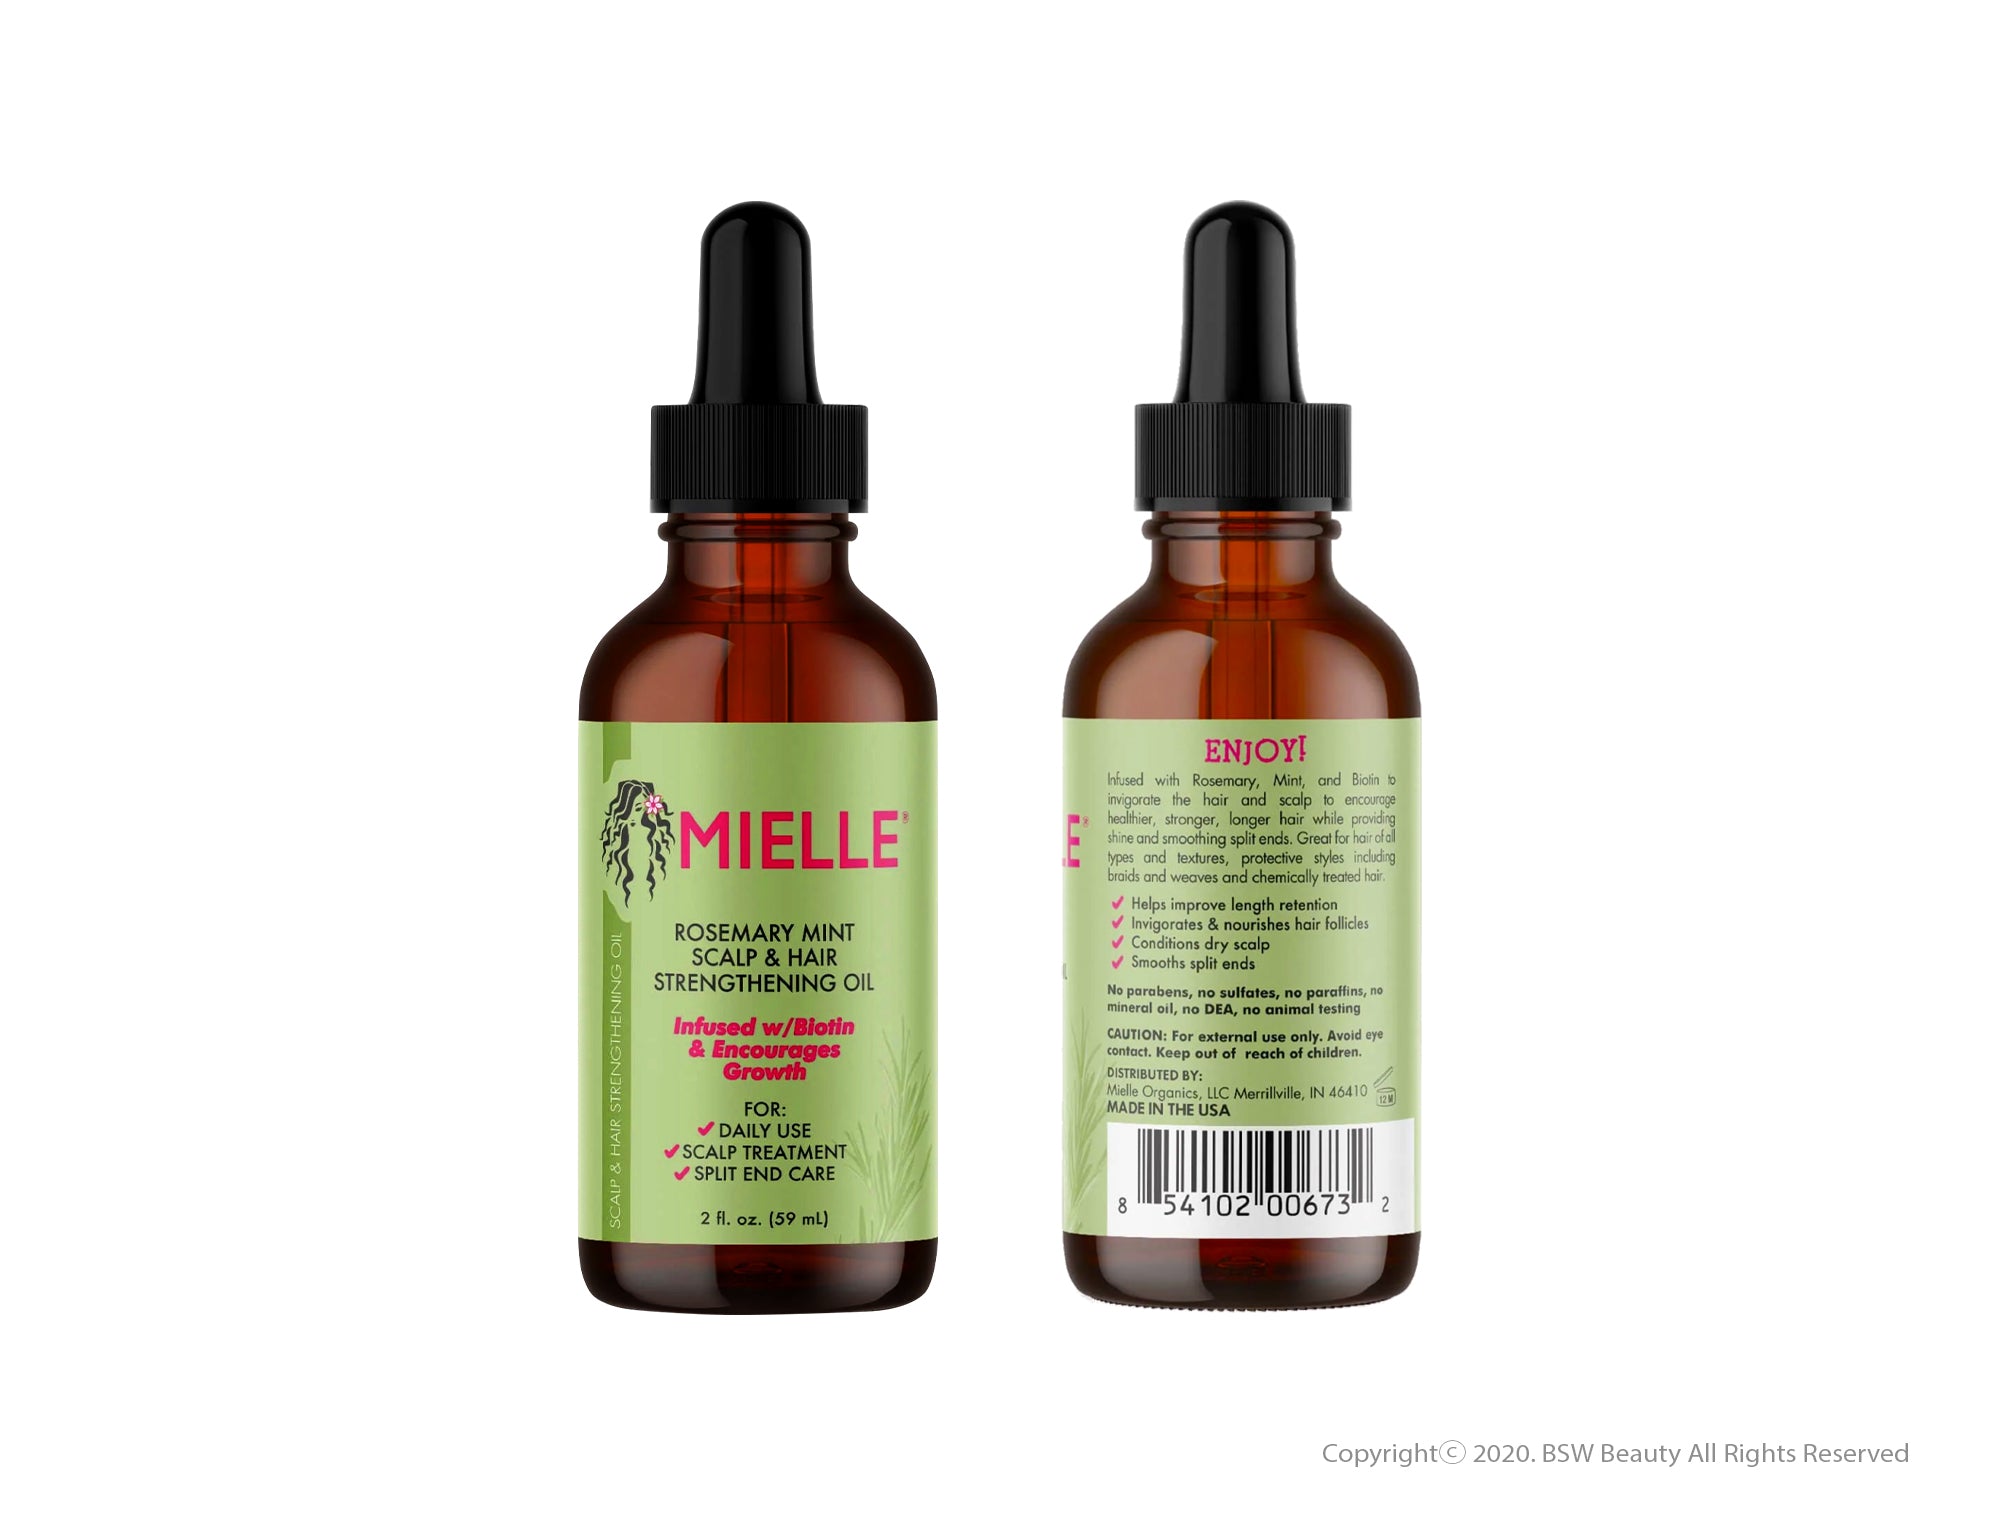 MIELLE ROSEMARY MINT SCALP & HAIR STRENGTHENING OIL INFUSED W/ BIOTIN & ENCOURAGES GROWTH 2oz